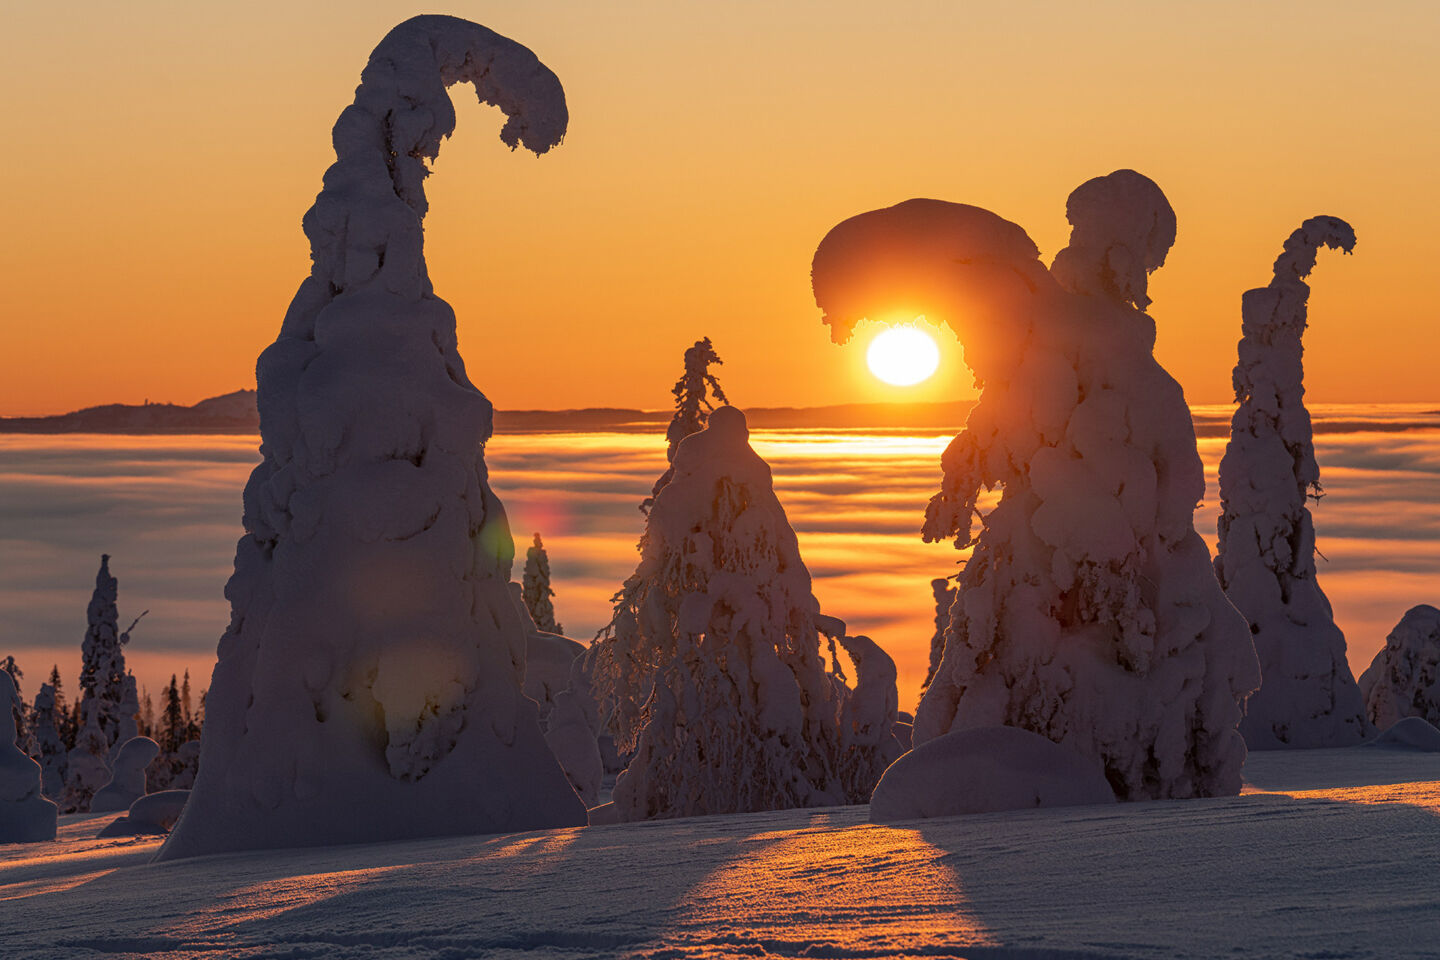 Sunset and snow-crowned trees in Riisitunturi National Park in Posio, a Finnish Lapland filming location